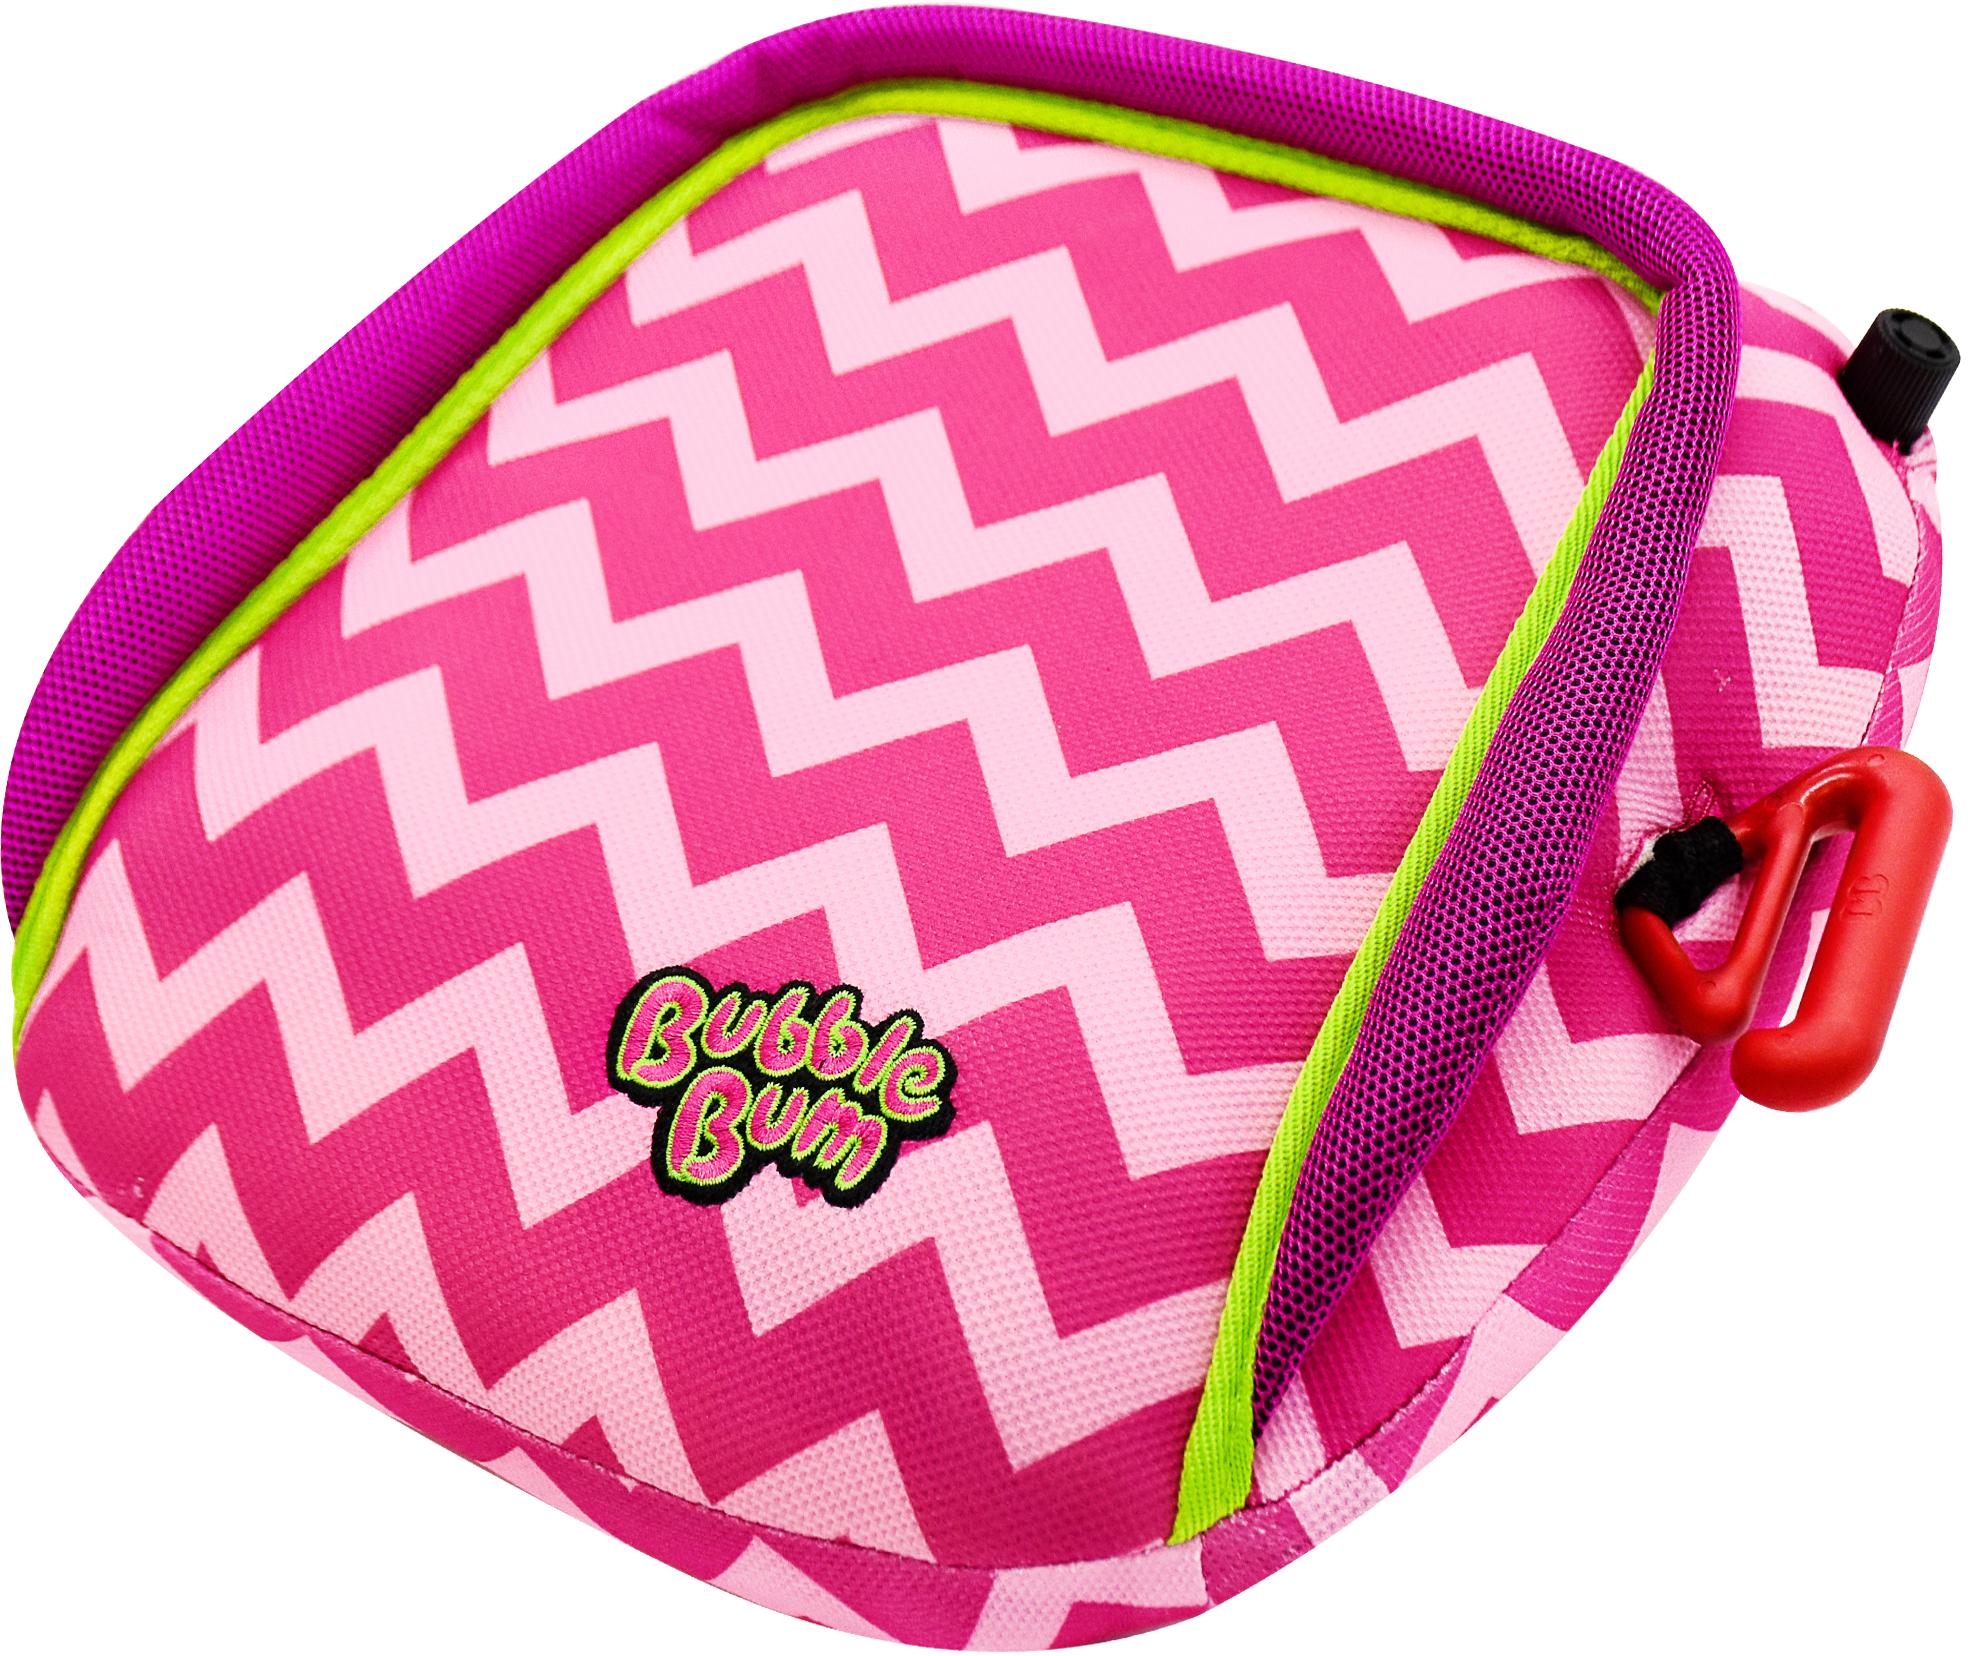 Bubblebum Inflatable Booster Seat - Pink